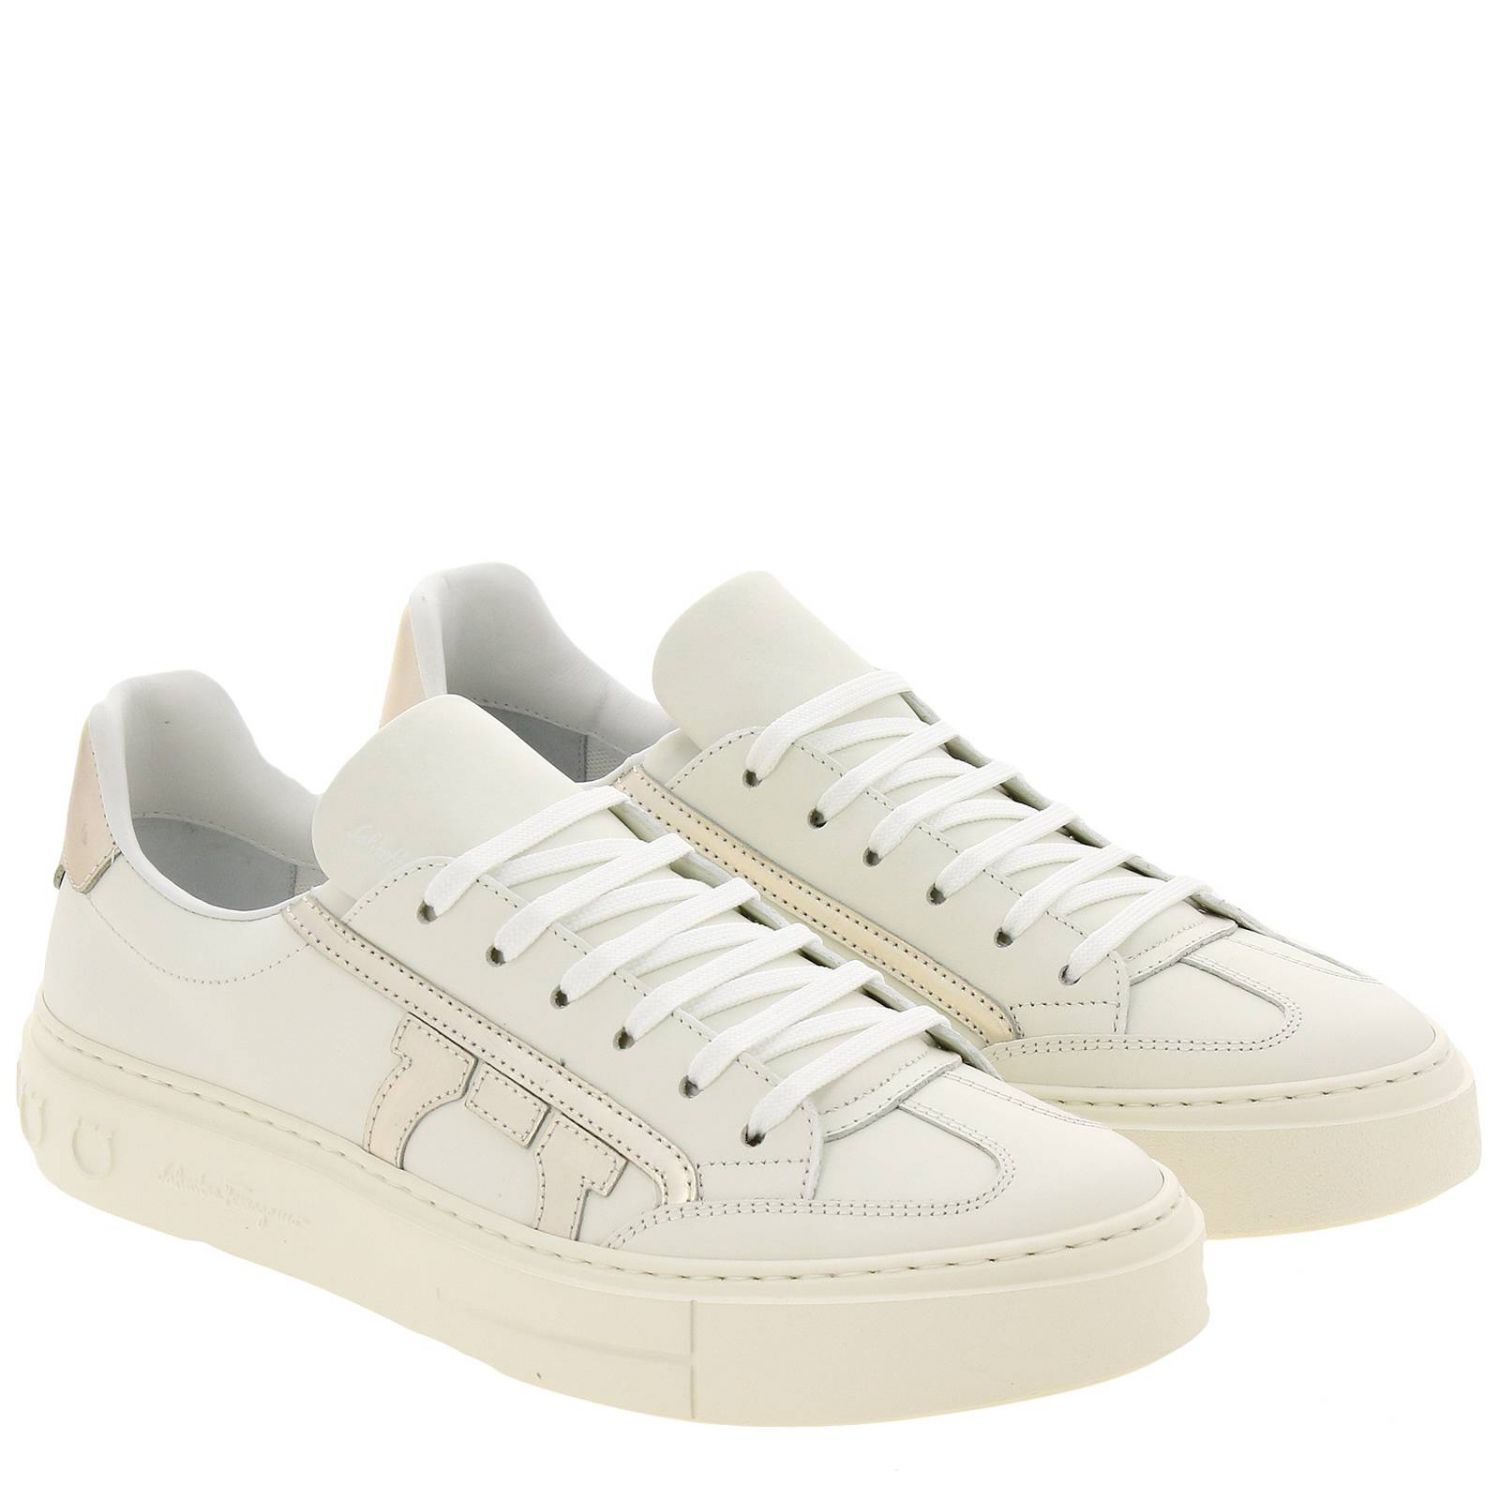 Salvatore Ferragamo Outlet: Borg 10 sneakers in genuine smooth leather ...